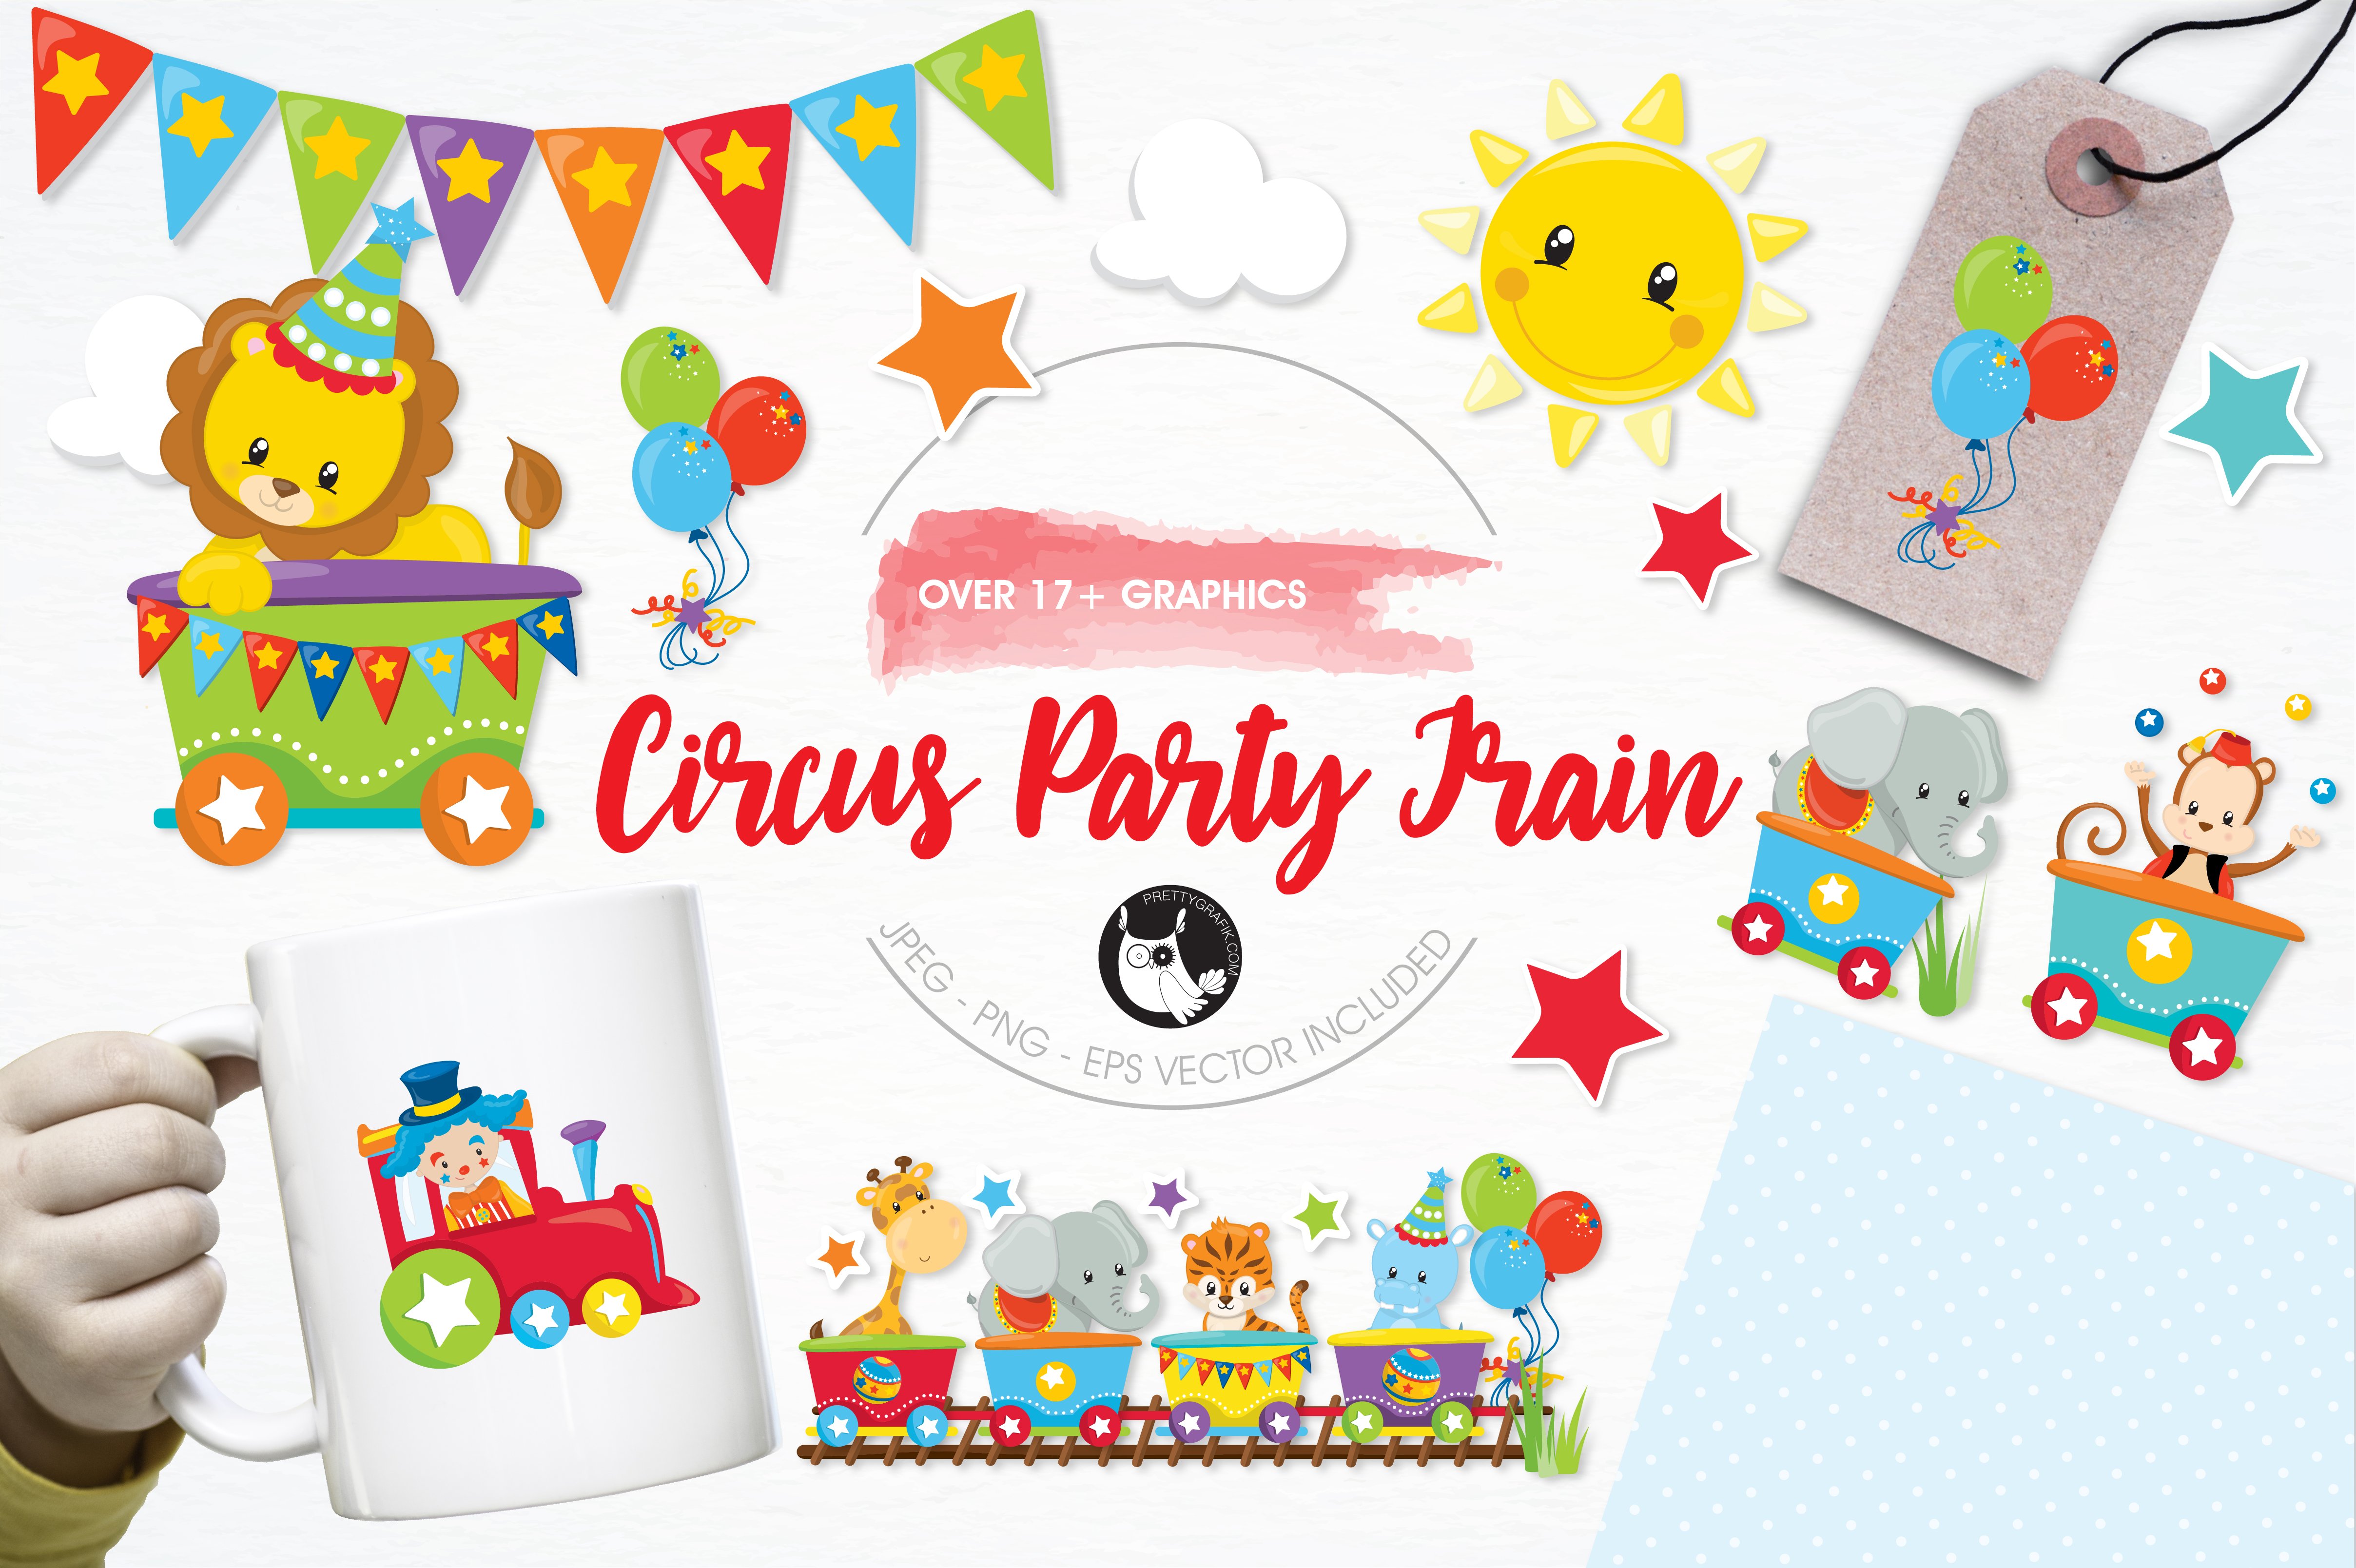 Circus party train illustration pack - Vector Image